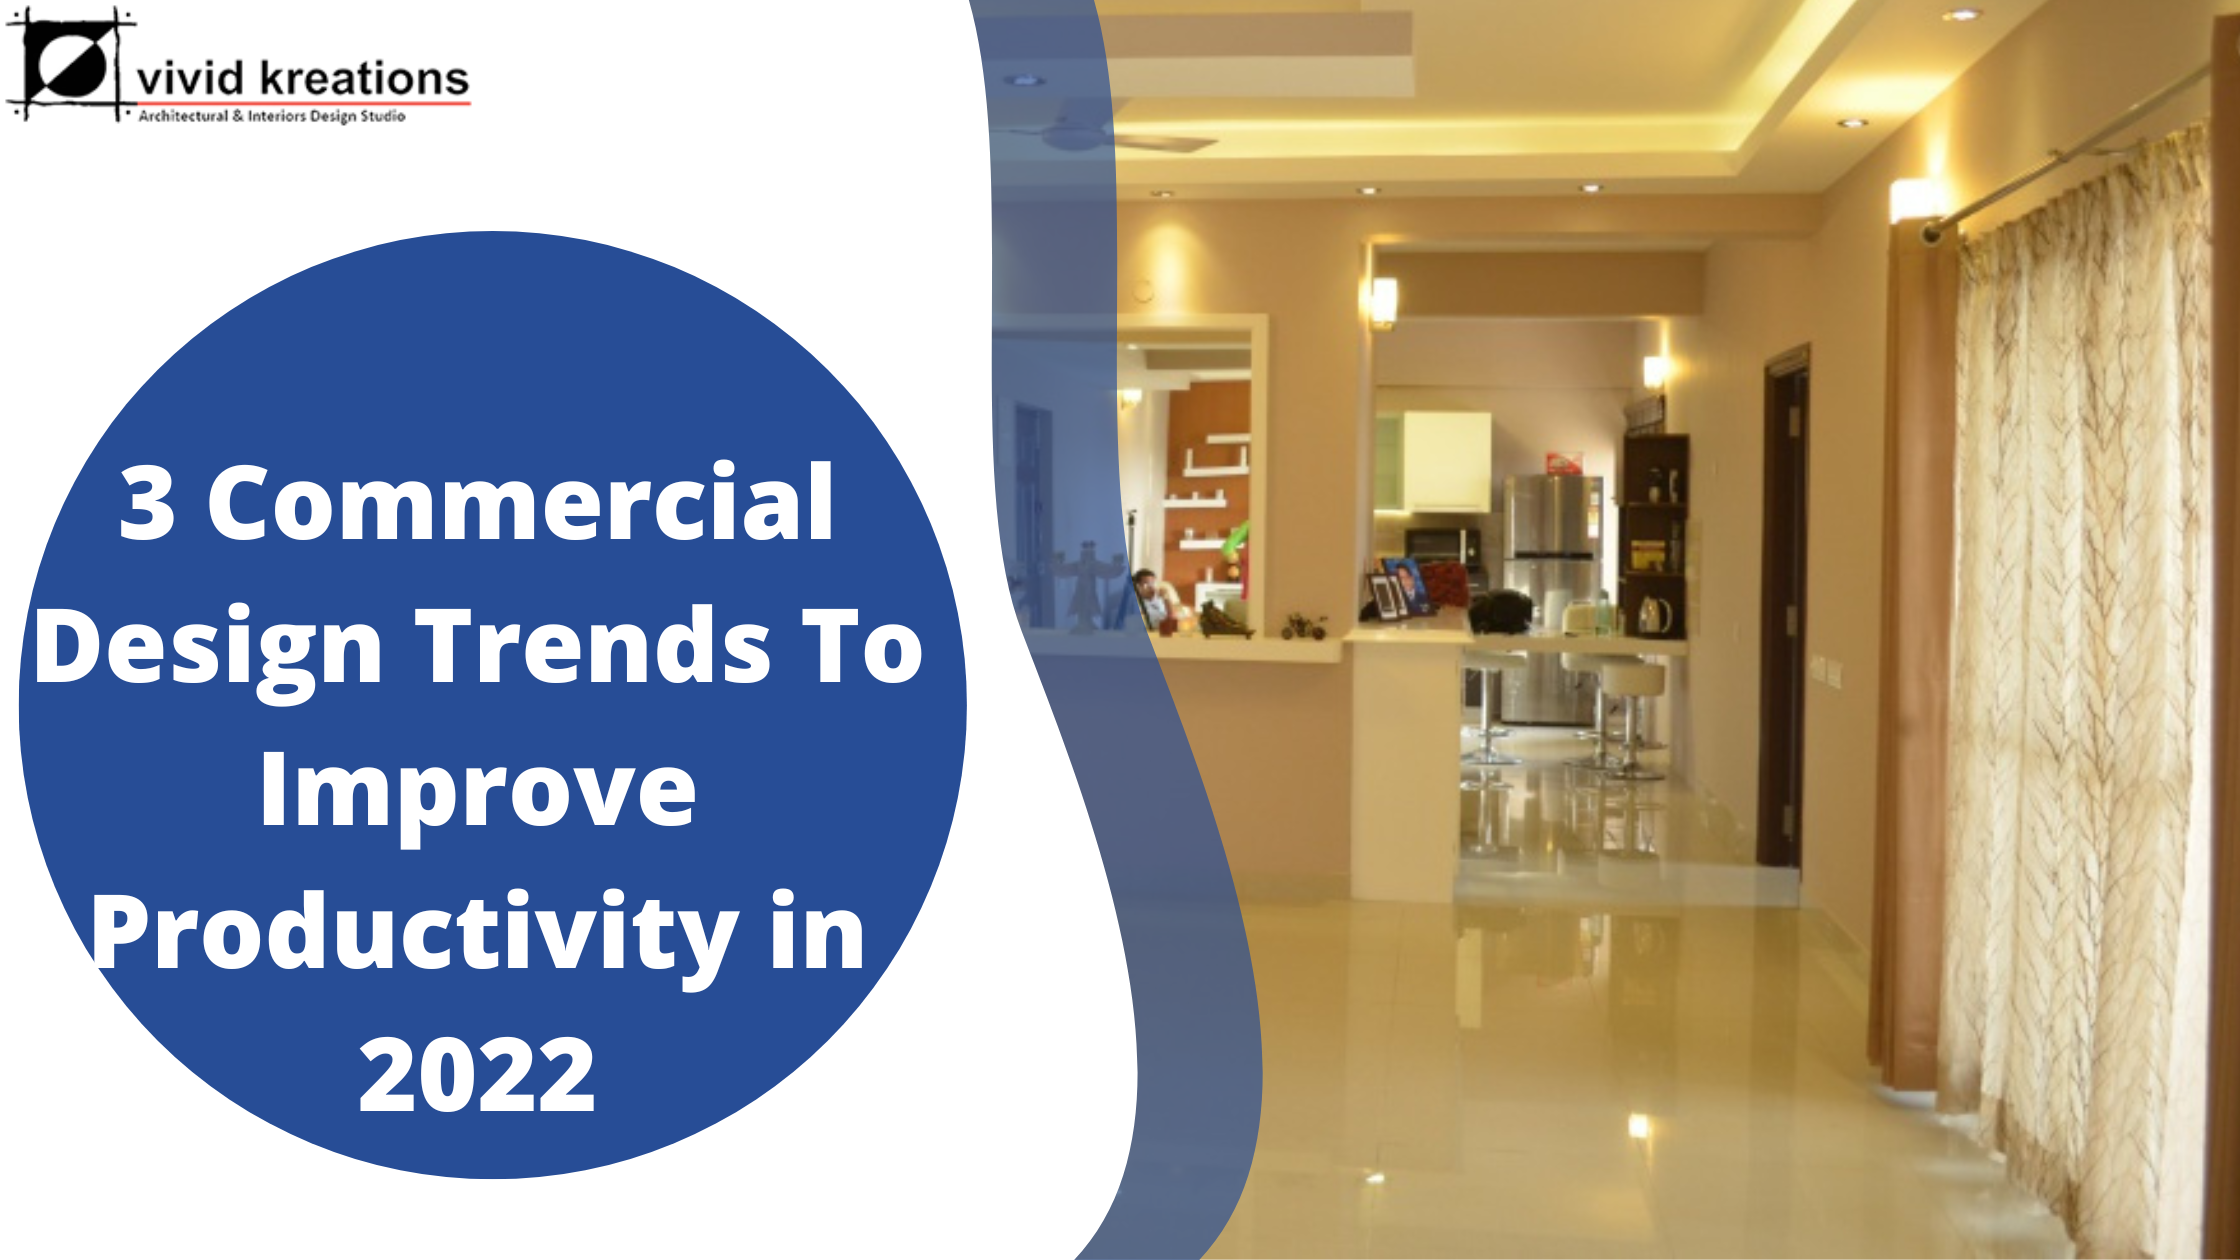 3 Commercial Design Trends To Improve Productivity in 2022 - vividkreations